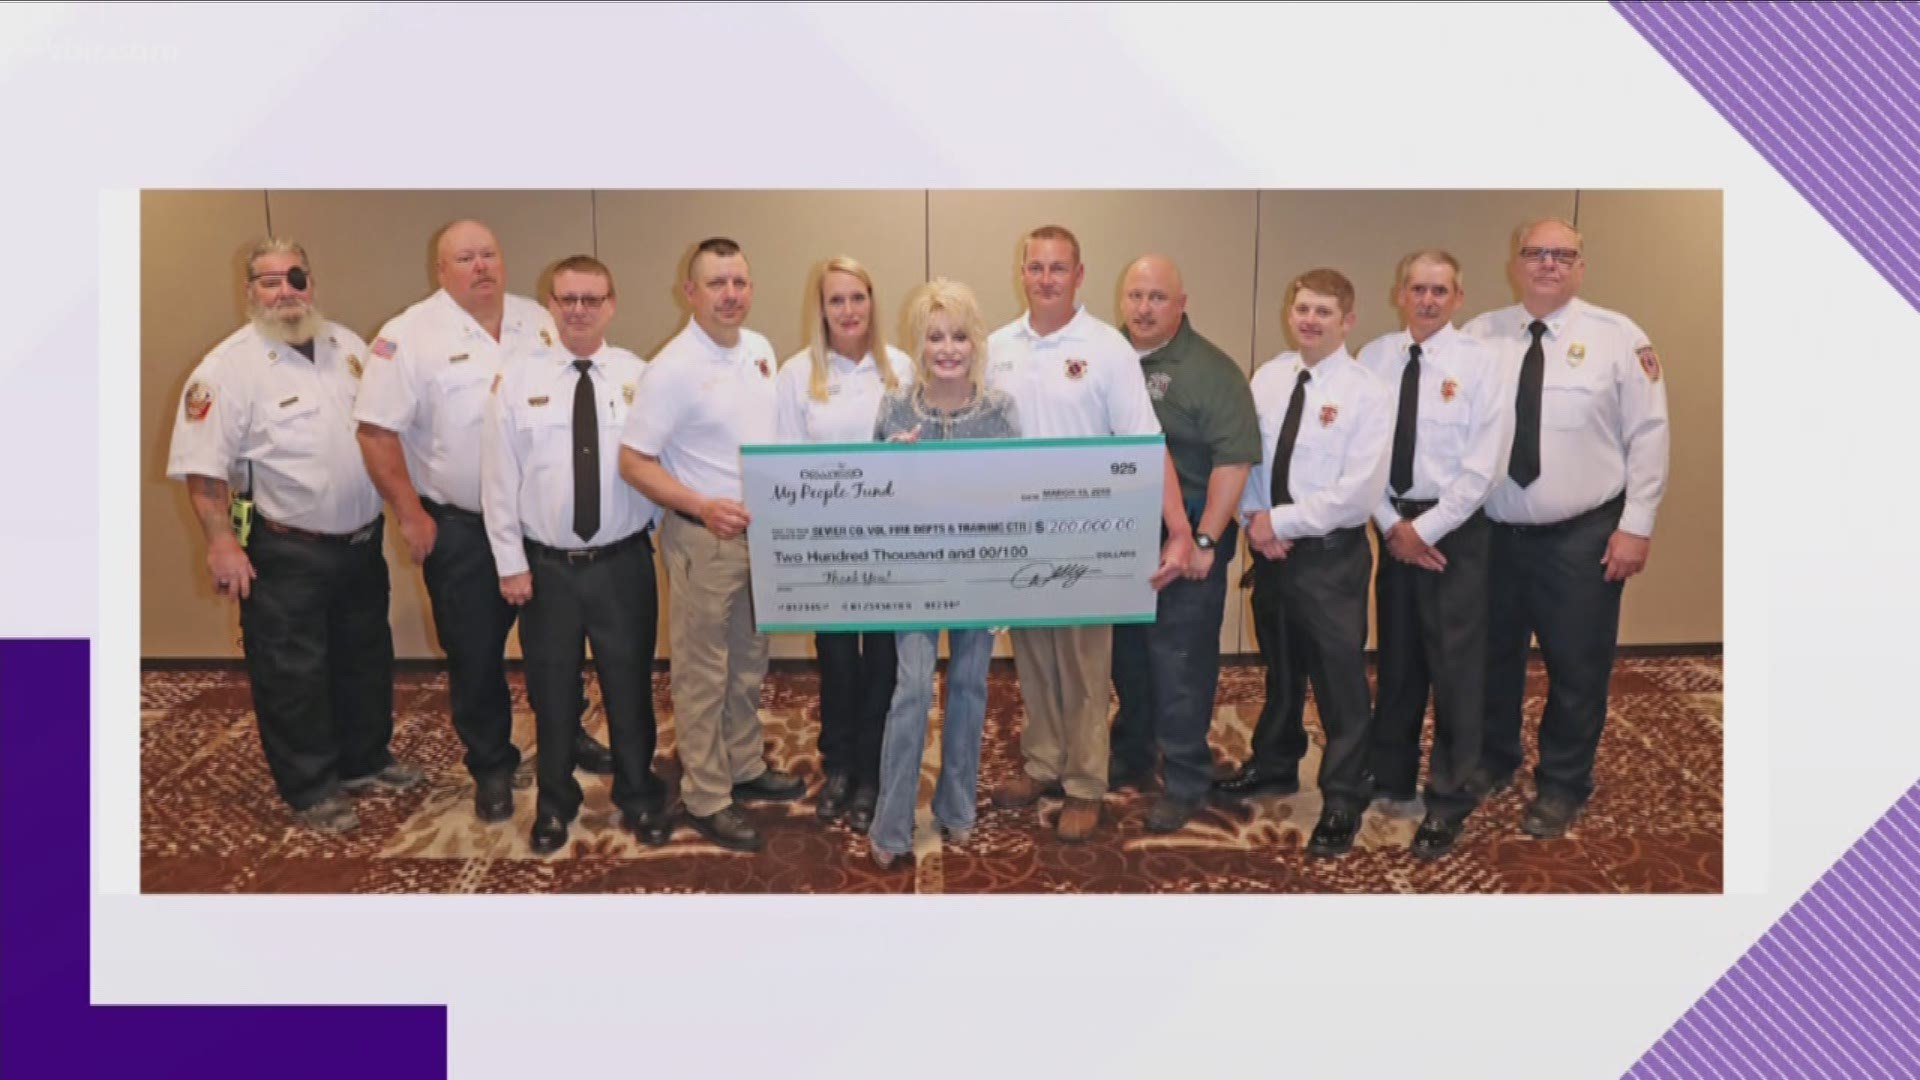 Dolly Parton and her "My People Fund" are donating $200,000 to eight Sevier County volunteer fire departments.